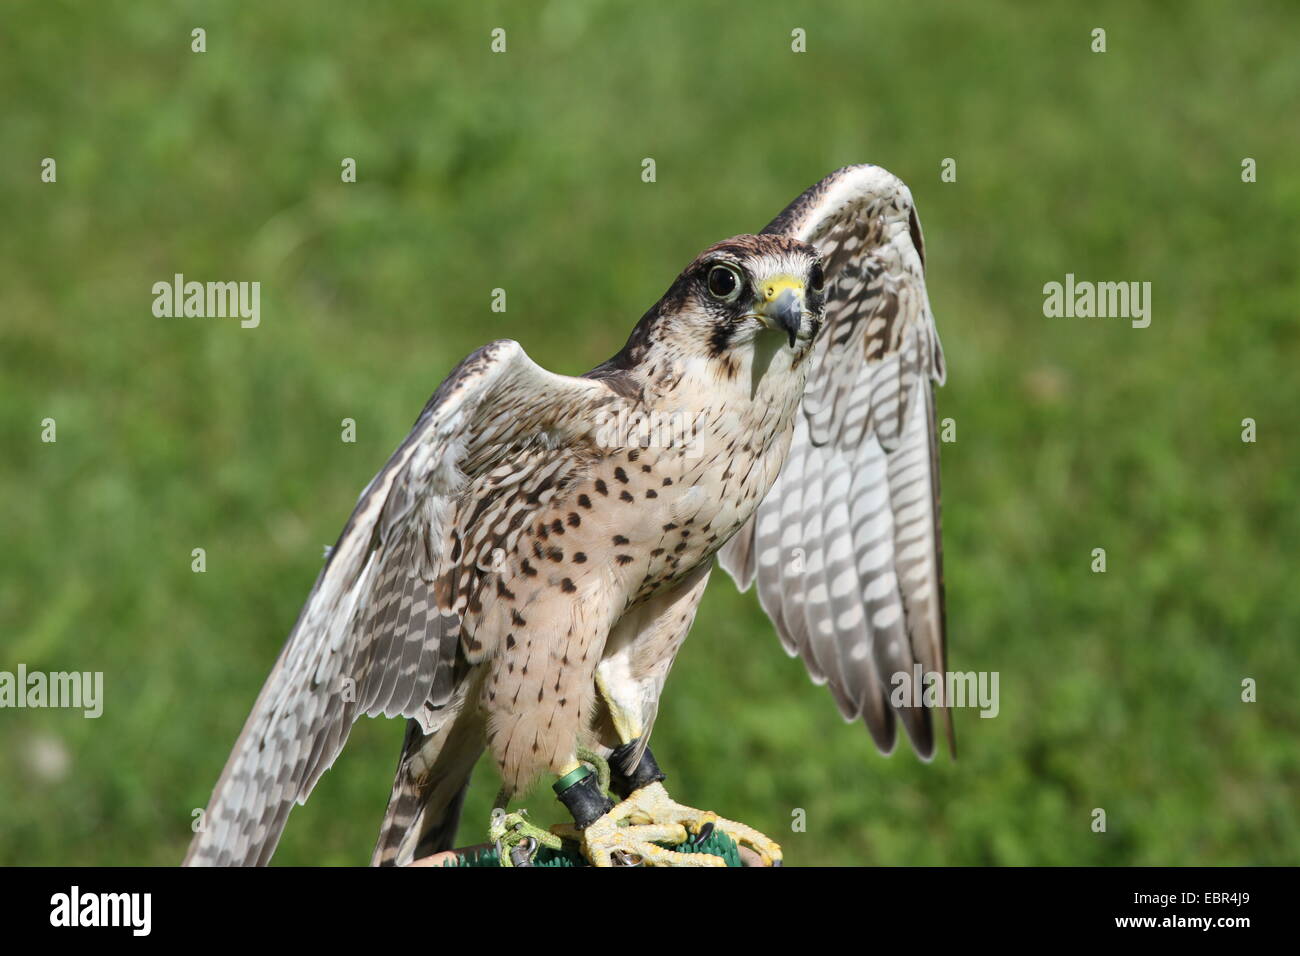 huge Peregrine Falcon with outstretched wings ready for flight Stock Photo